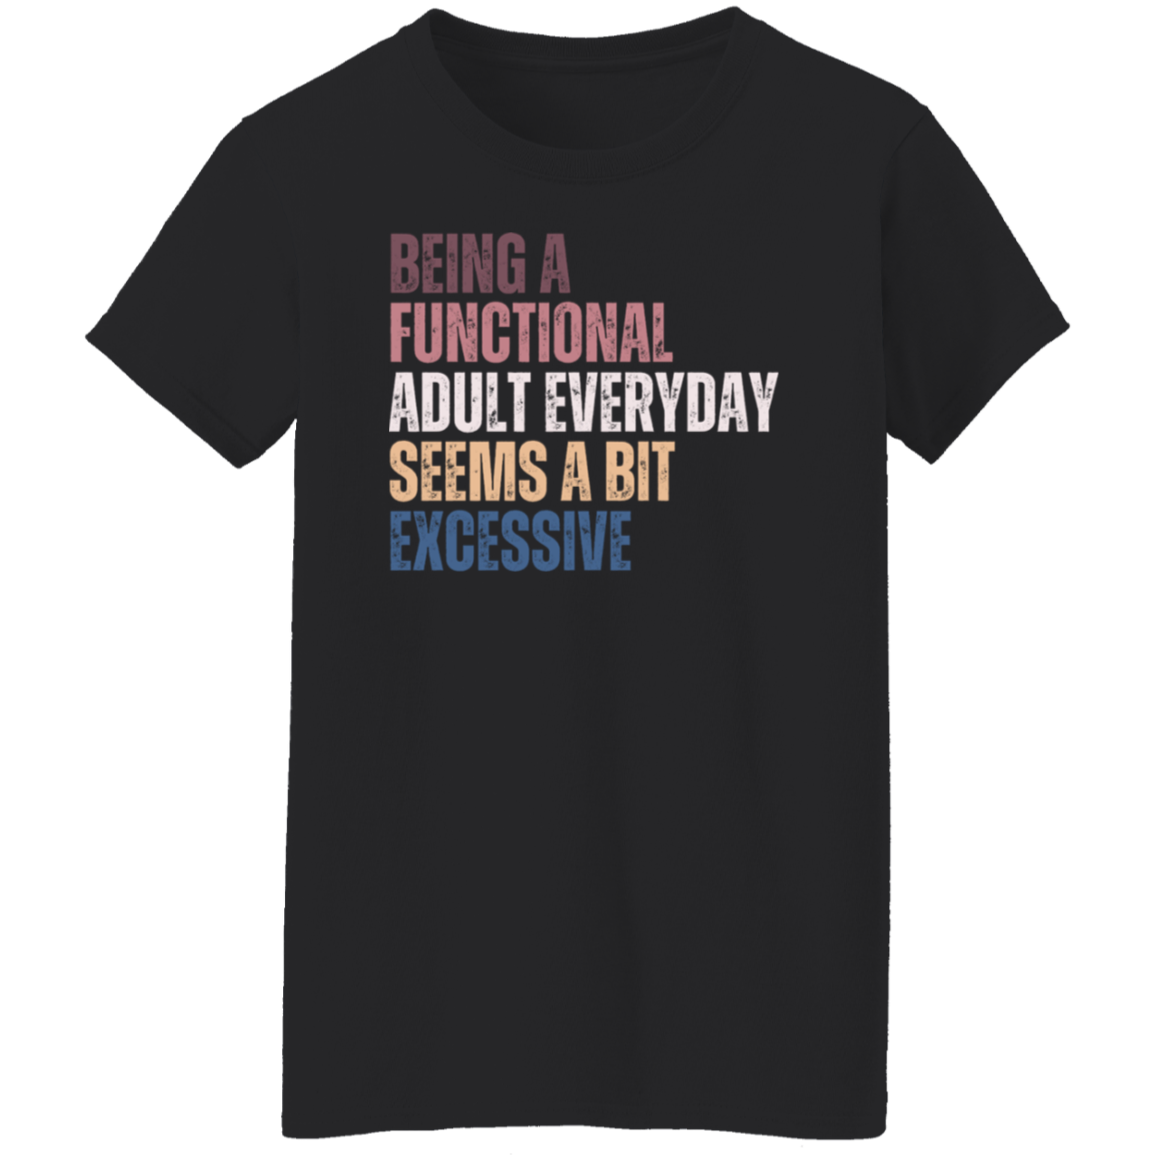 Functional Adult T-Shirt